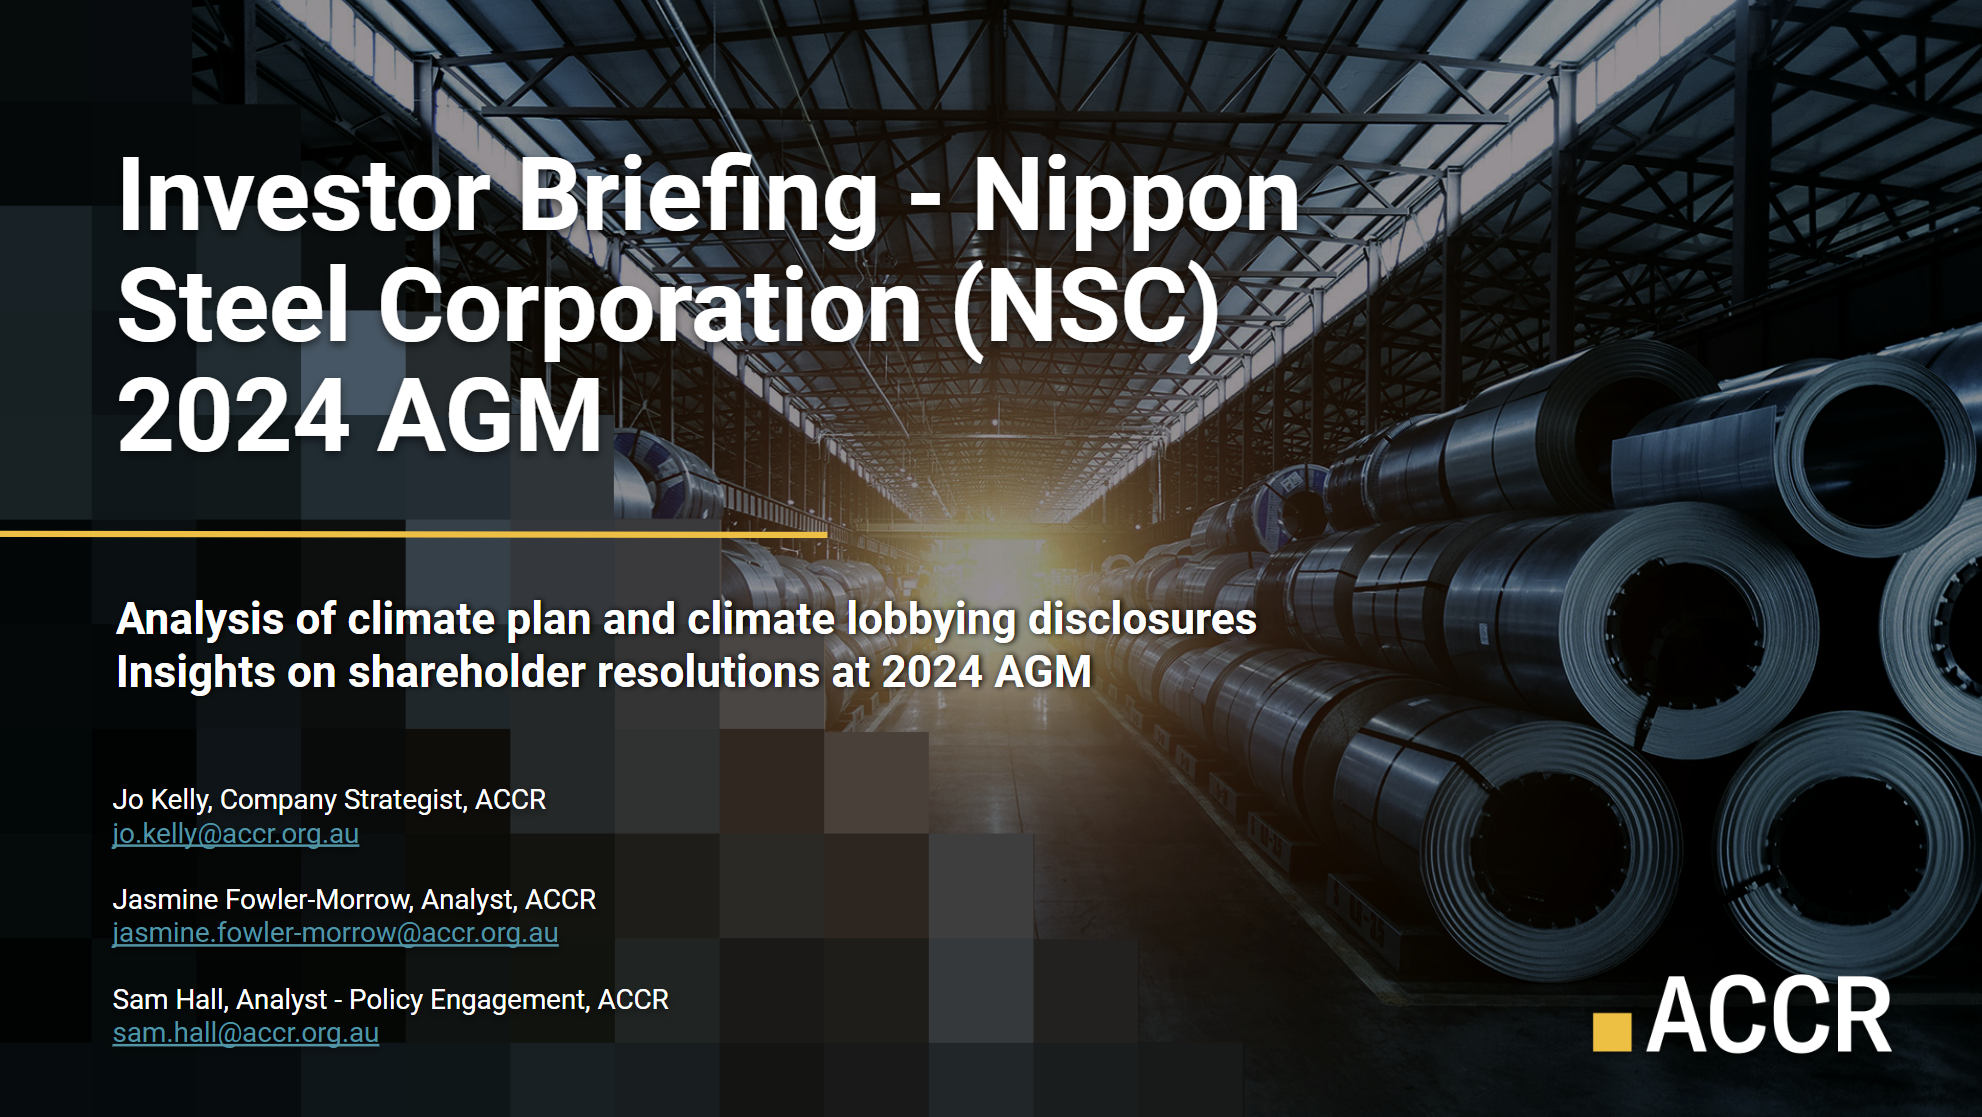 Cover page of the ACCR Presentation on Nippon Steel Corporation’s 2024 AGM publication.